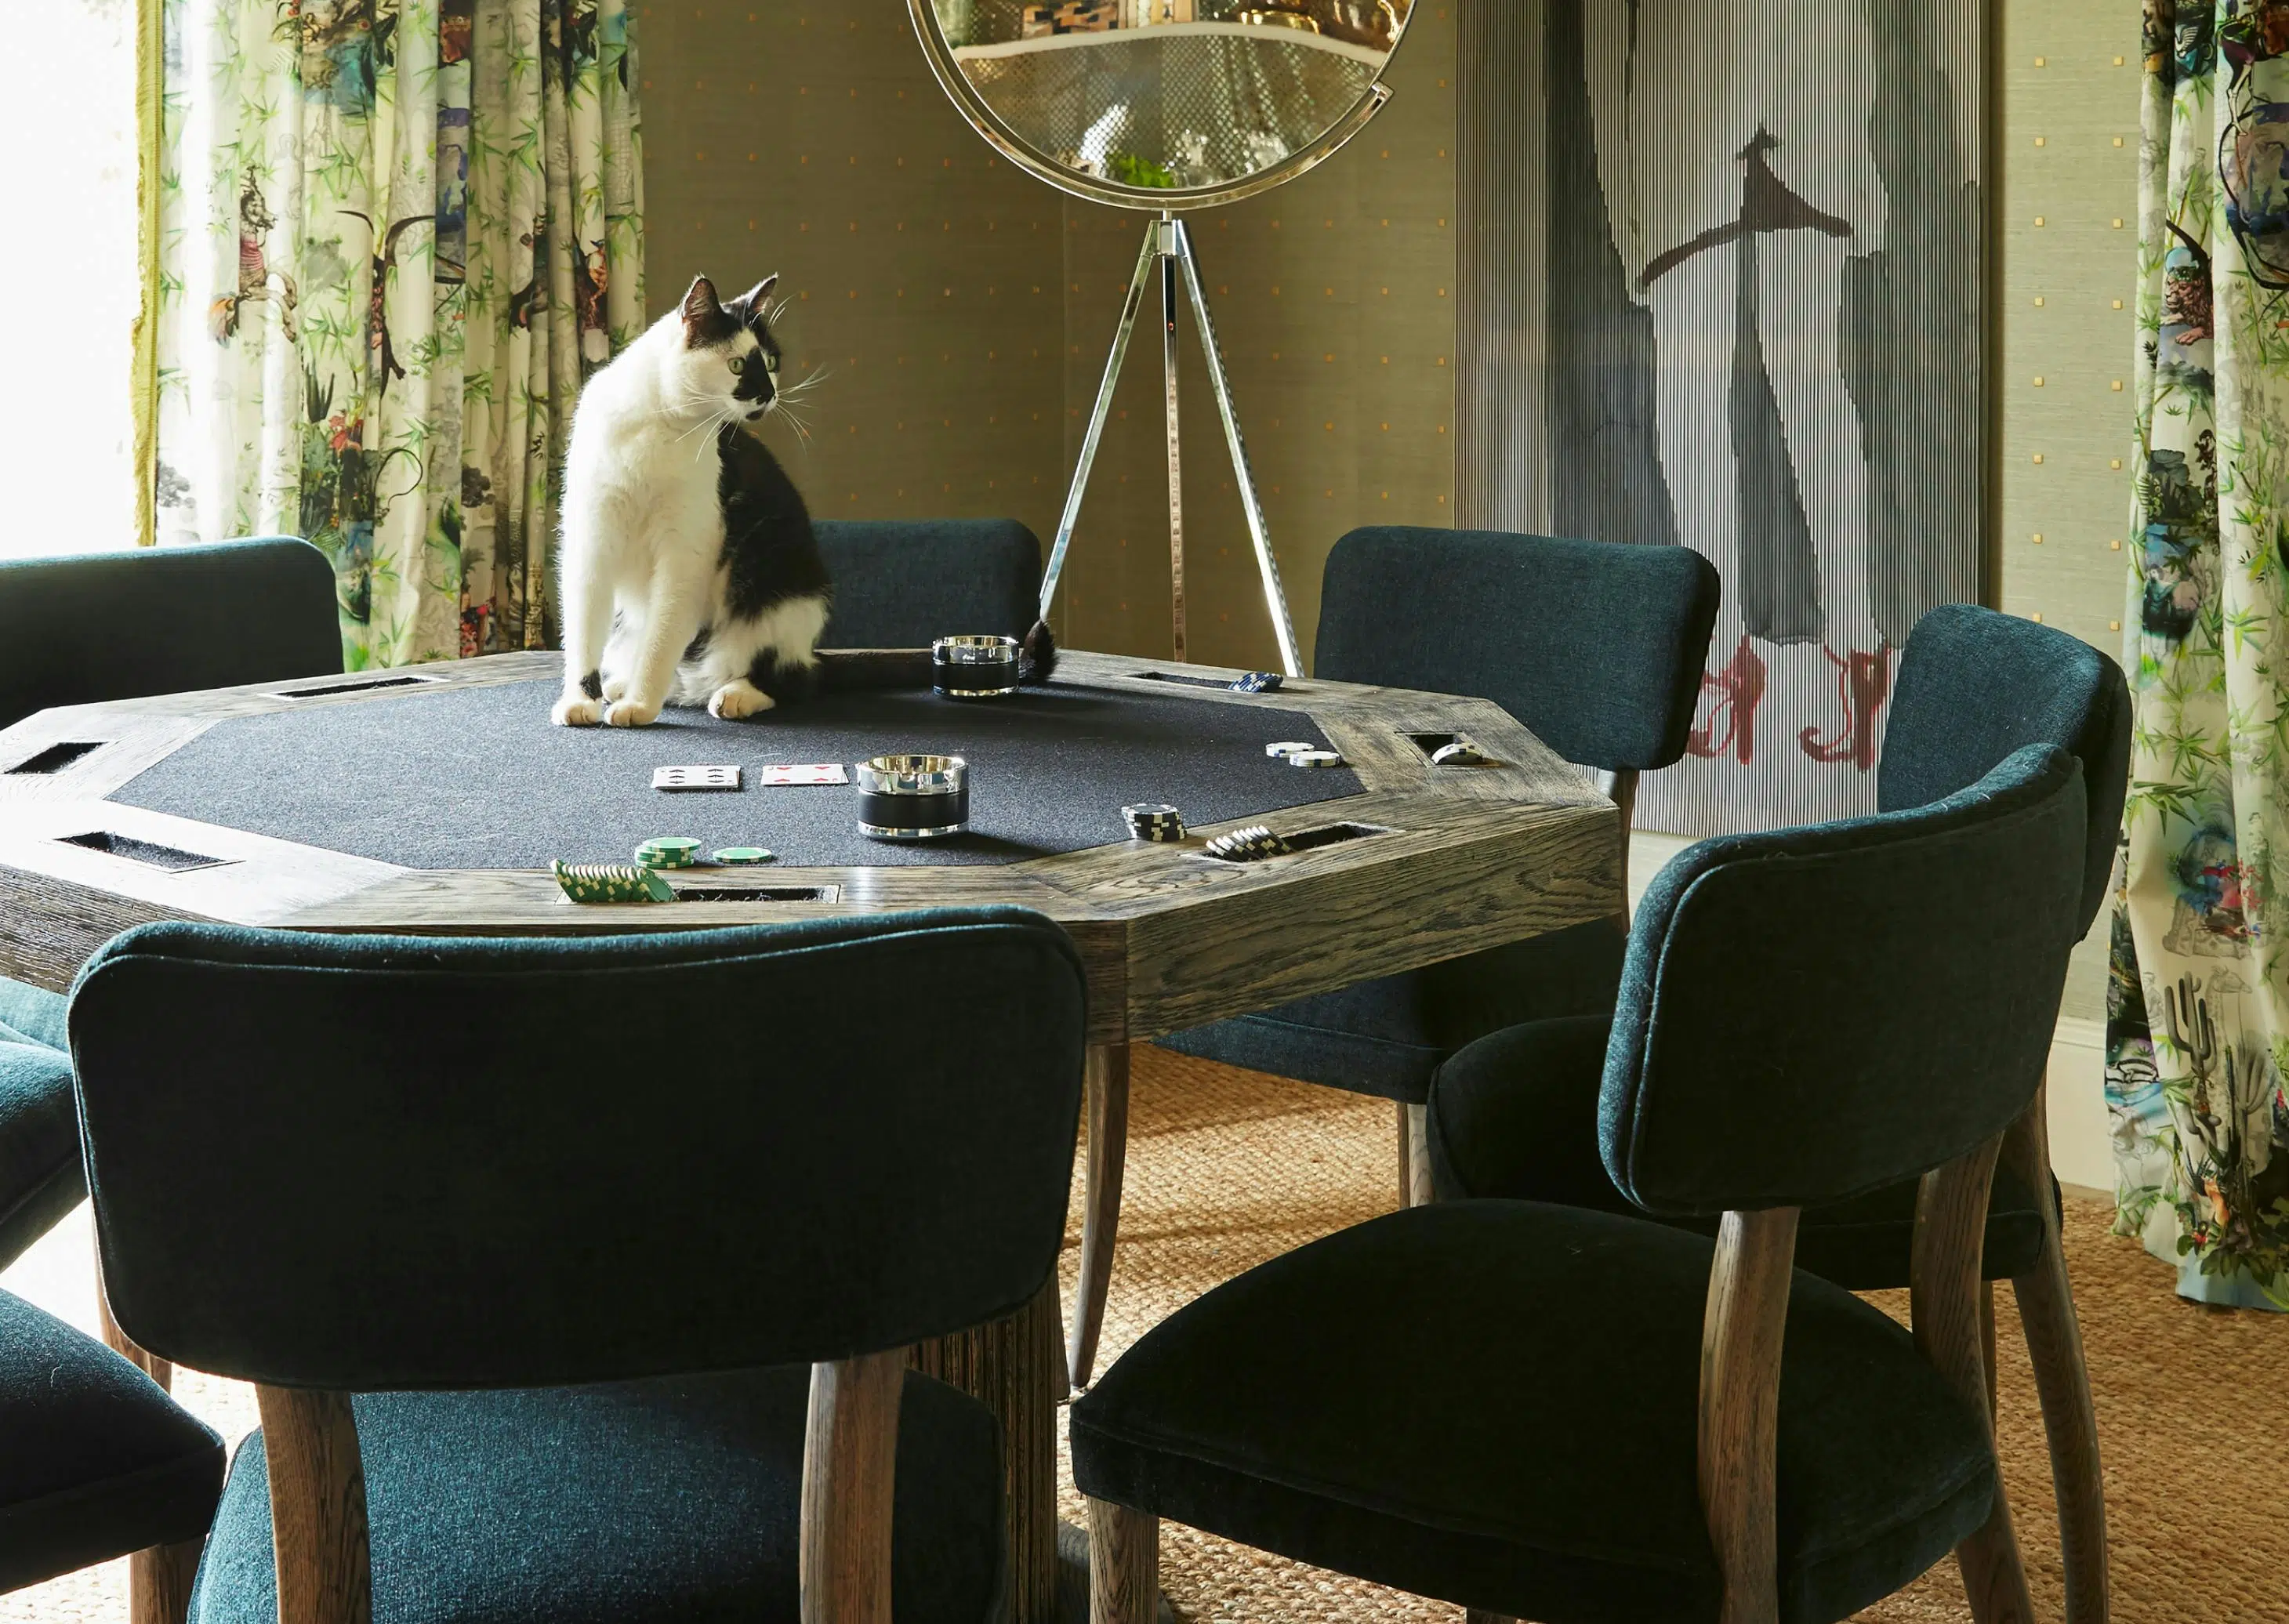 A cat with handsome black-and-white markings sits in the middle of a power table surrounded by chairs. A mirror stands in the corner of the room beside an artwork showing an outline of a person wearing red high heels.